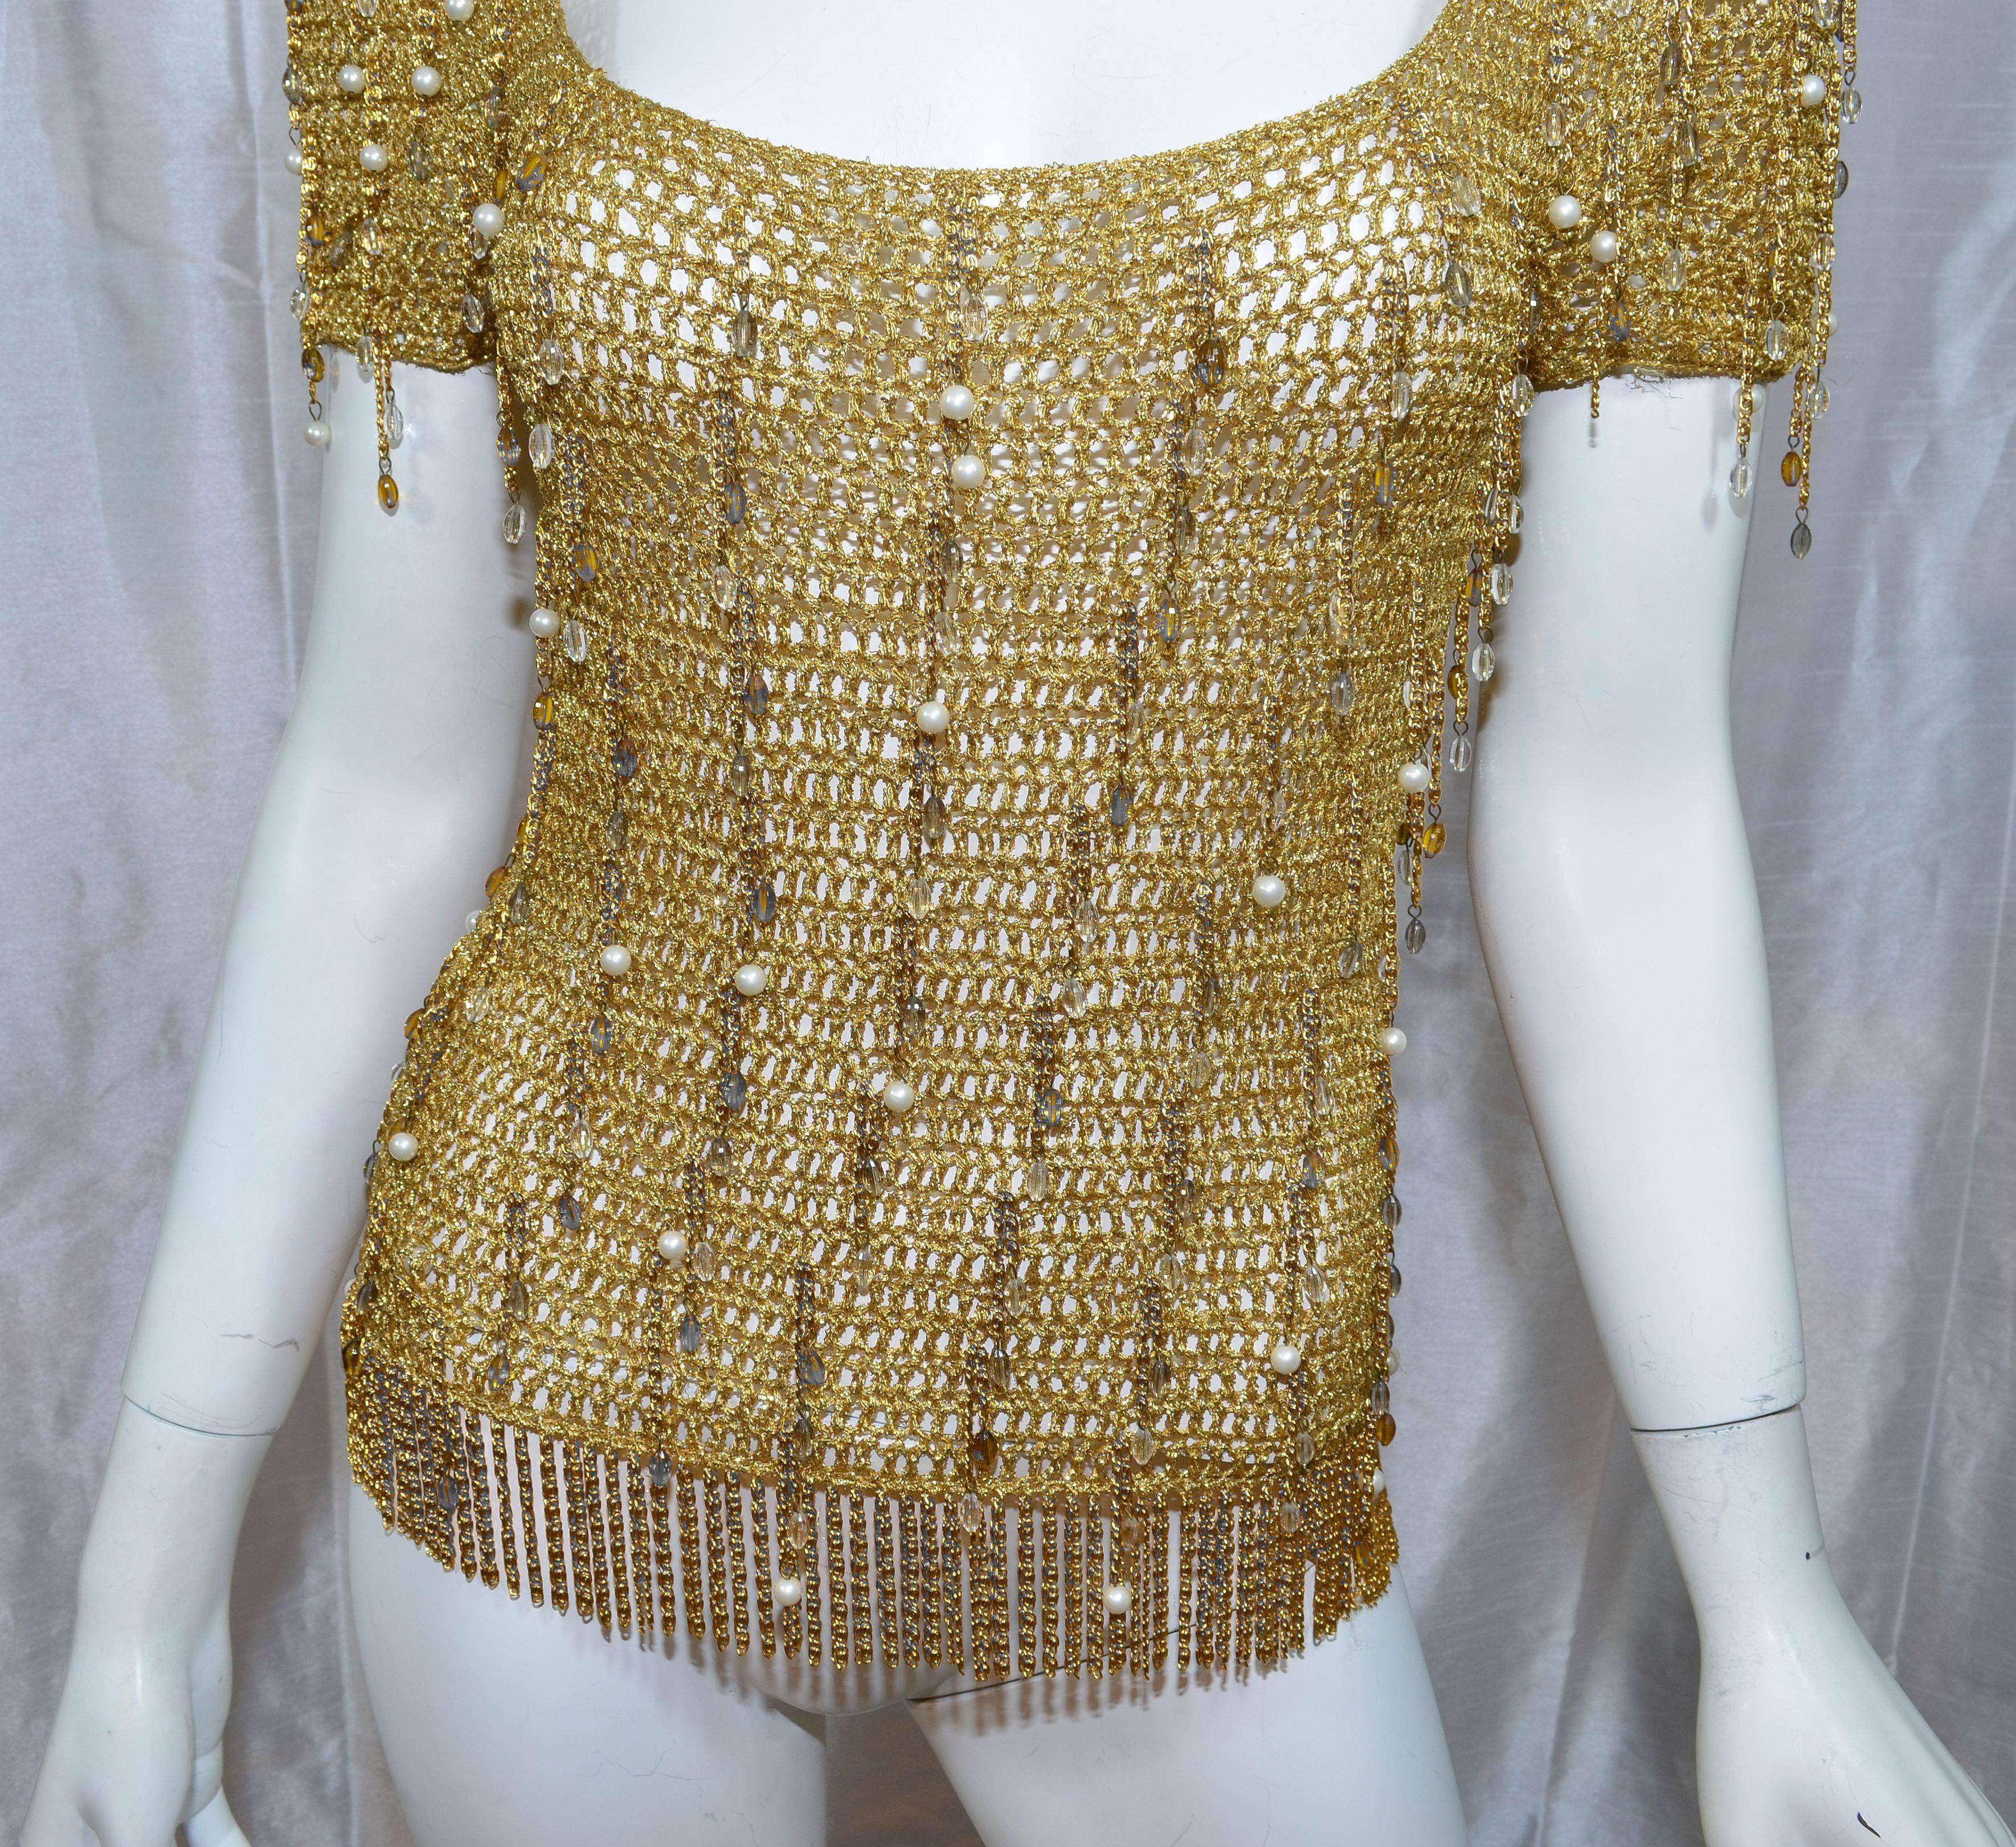 Loris Azzaro 1970s Vintage Gold Knit Bead Fringe Chain Top

Loris Azzaro top featured a gold metallic knit with dangling beads and chains throughout, and a gold fringed chain hem. In excellent vintage condition. Measurements are as